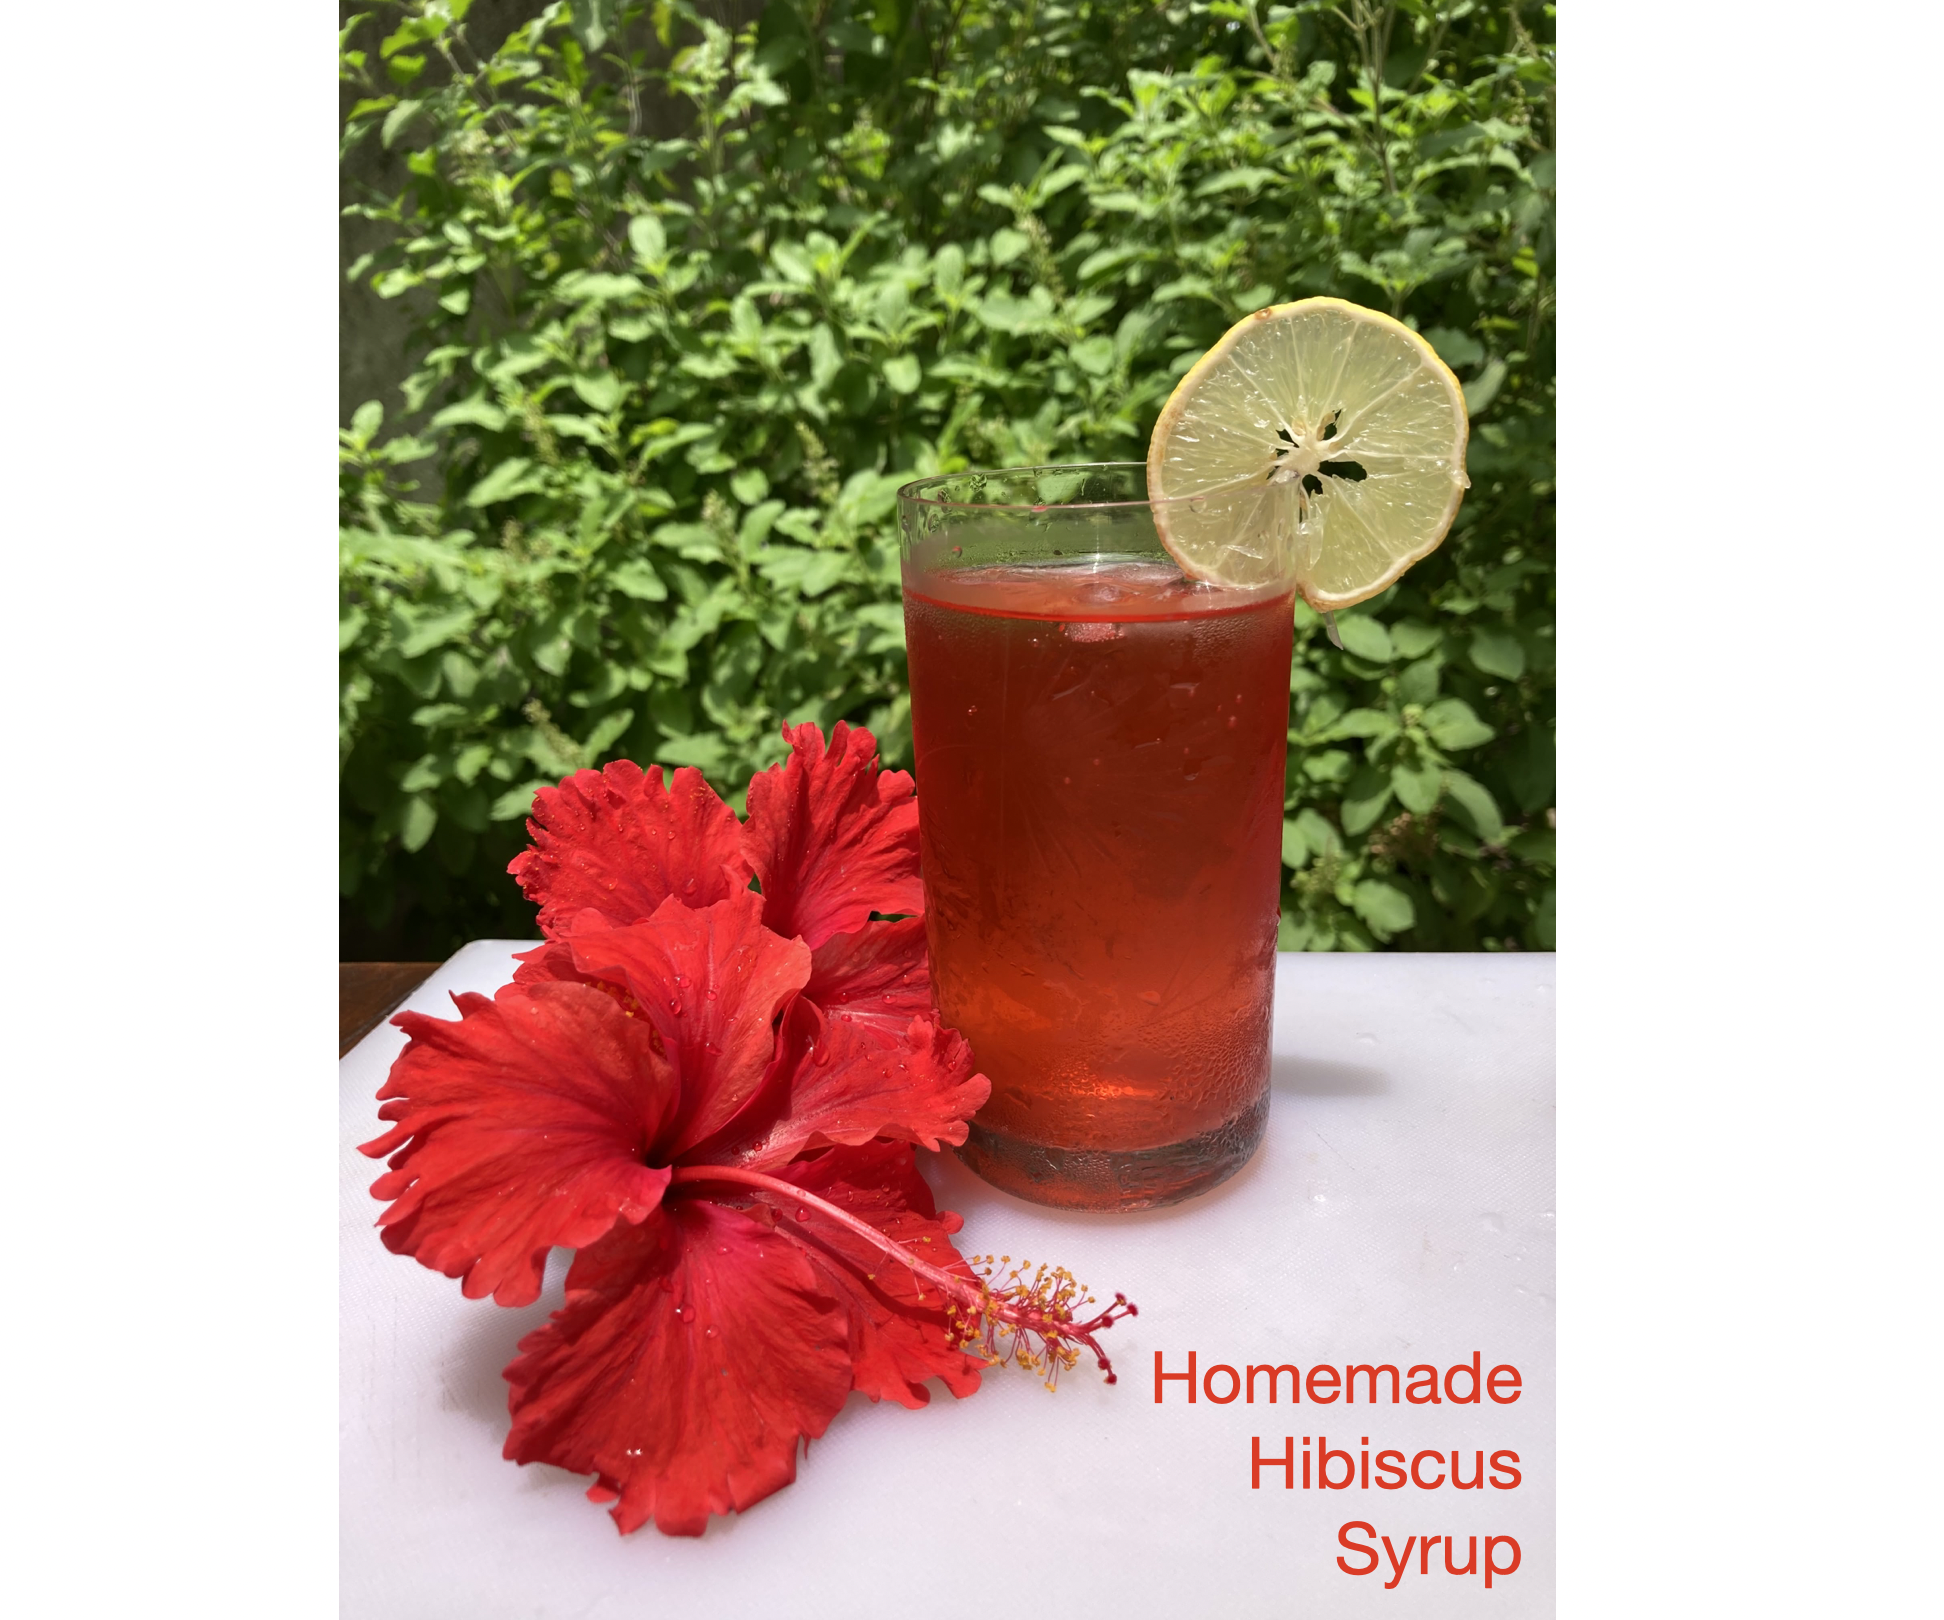 Homemade Hibiscus Syrup (from Homegrown Hibiscus Tree)